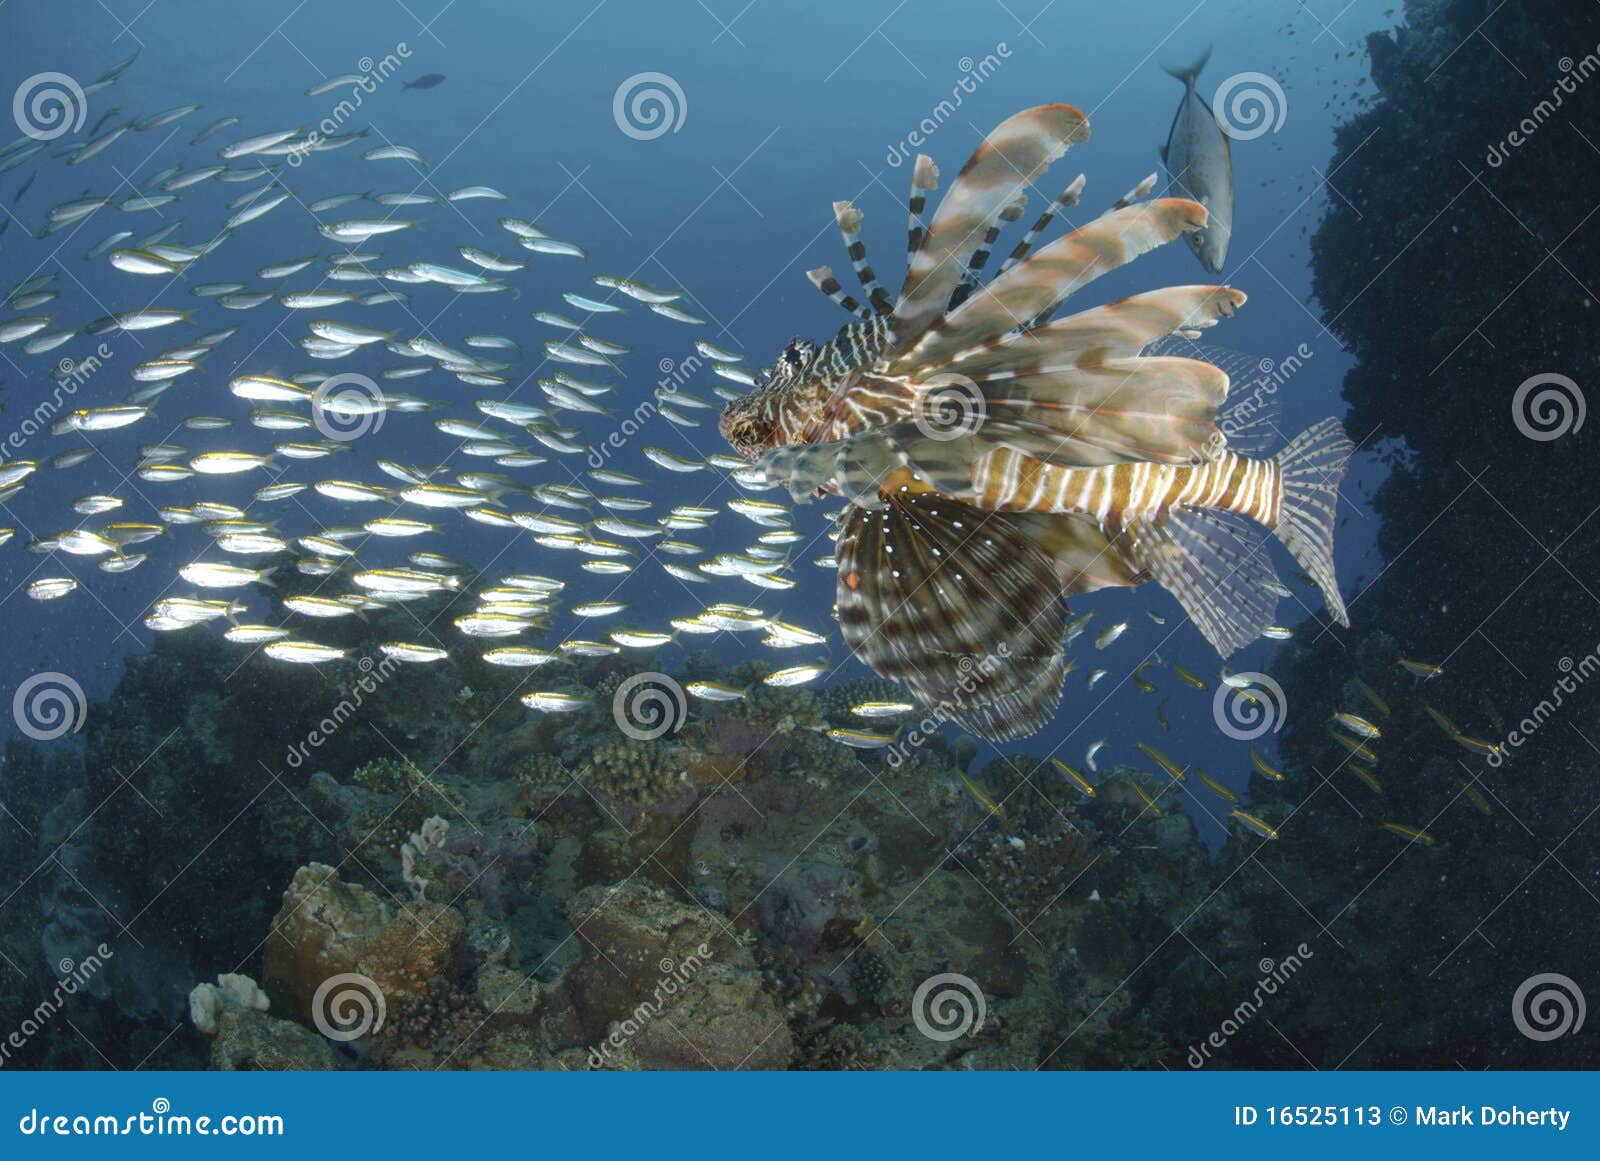 Common Lionfish and School of Small Bait Fish Stock Image - Image of miles,  poisonous: 16525113